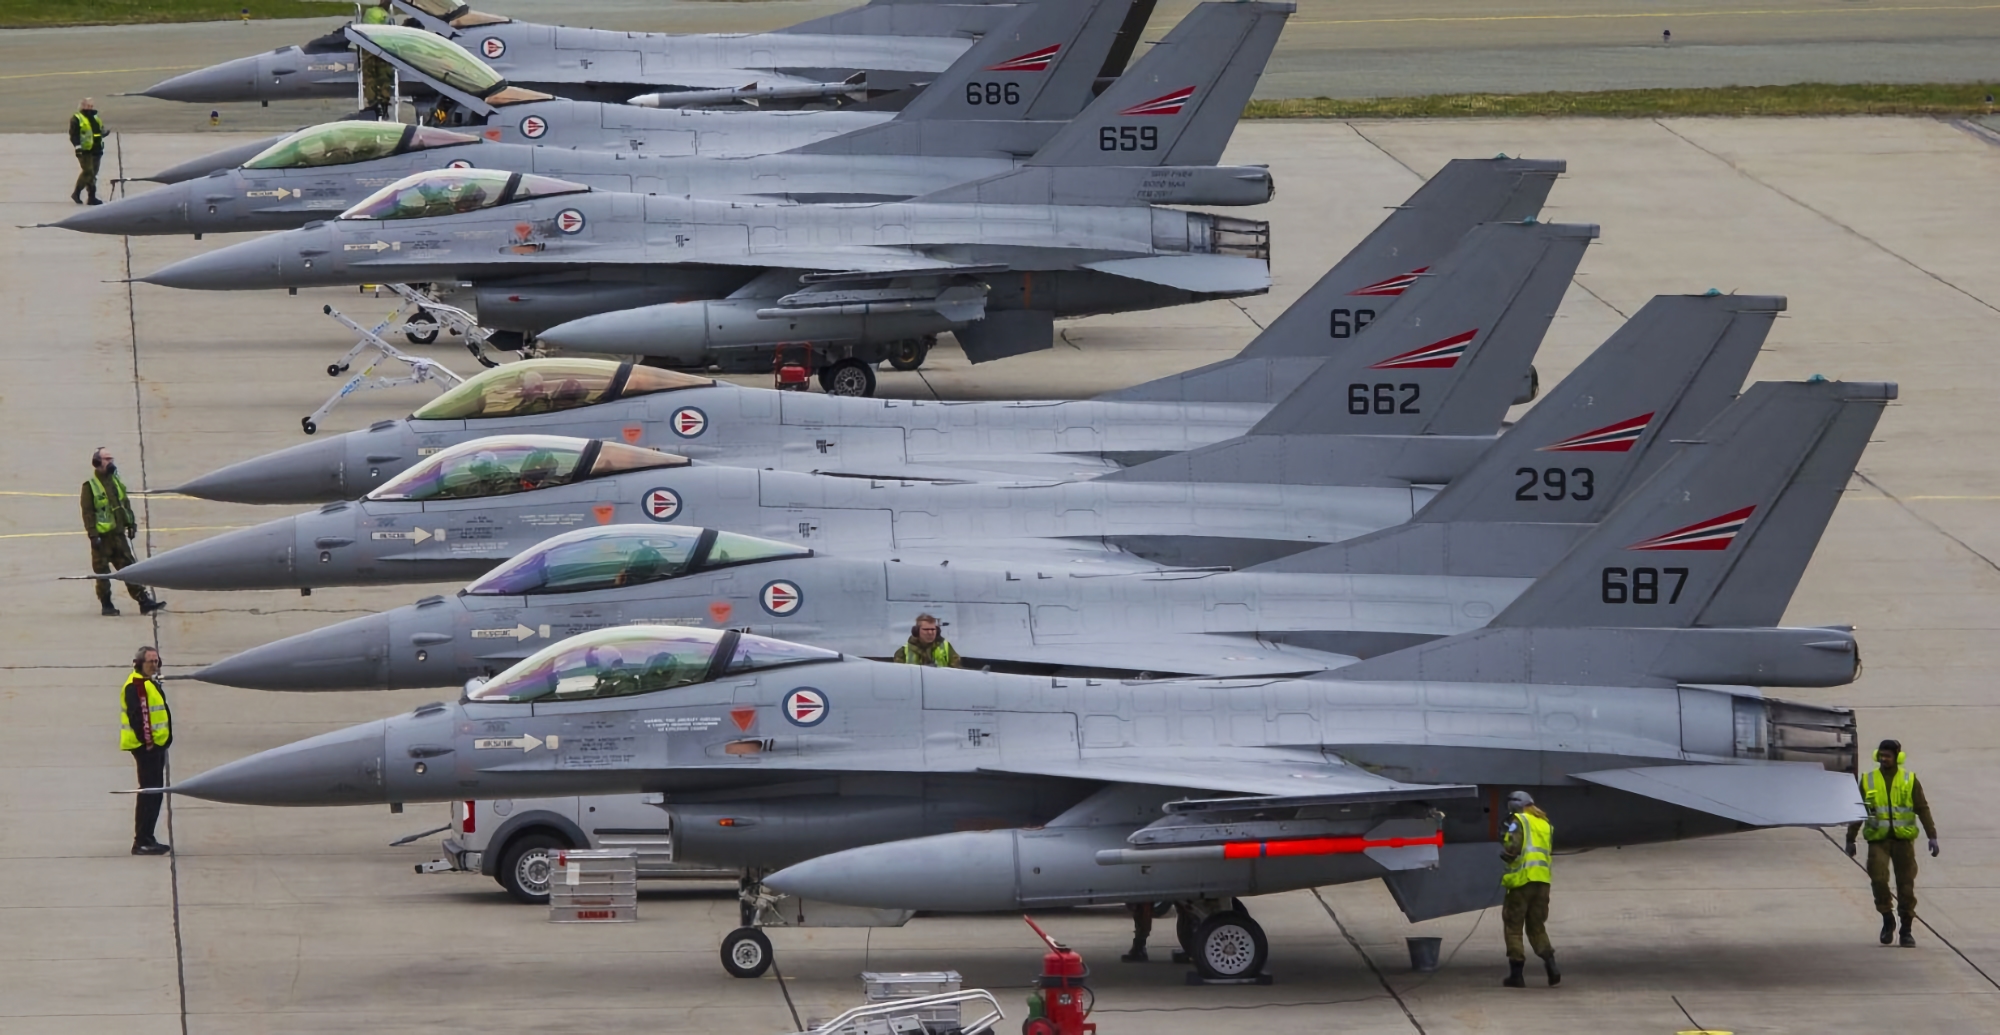 Media: Norway is going to send Ukraine 22 F-16 Fighting Falcon fighters, as well as engines and simulators for them